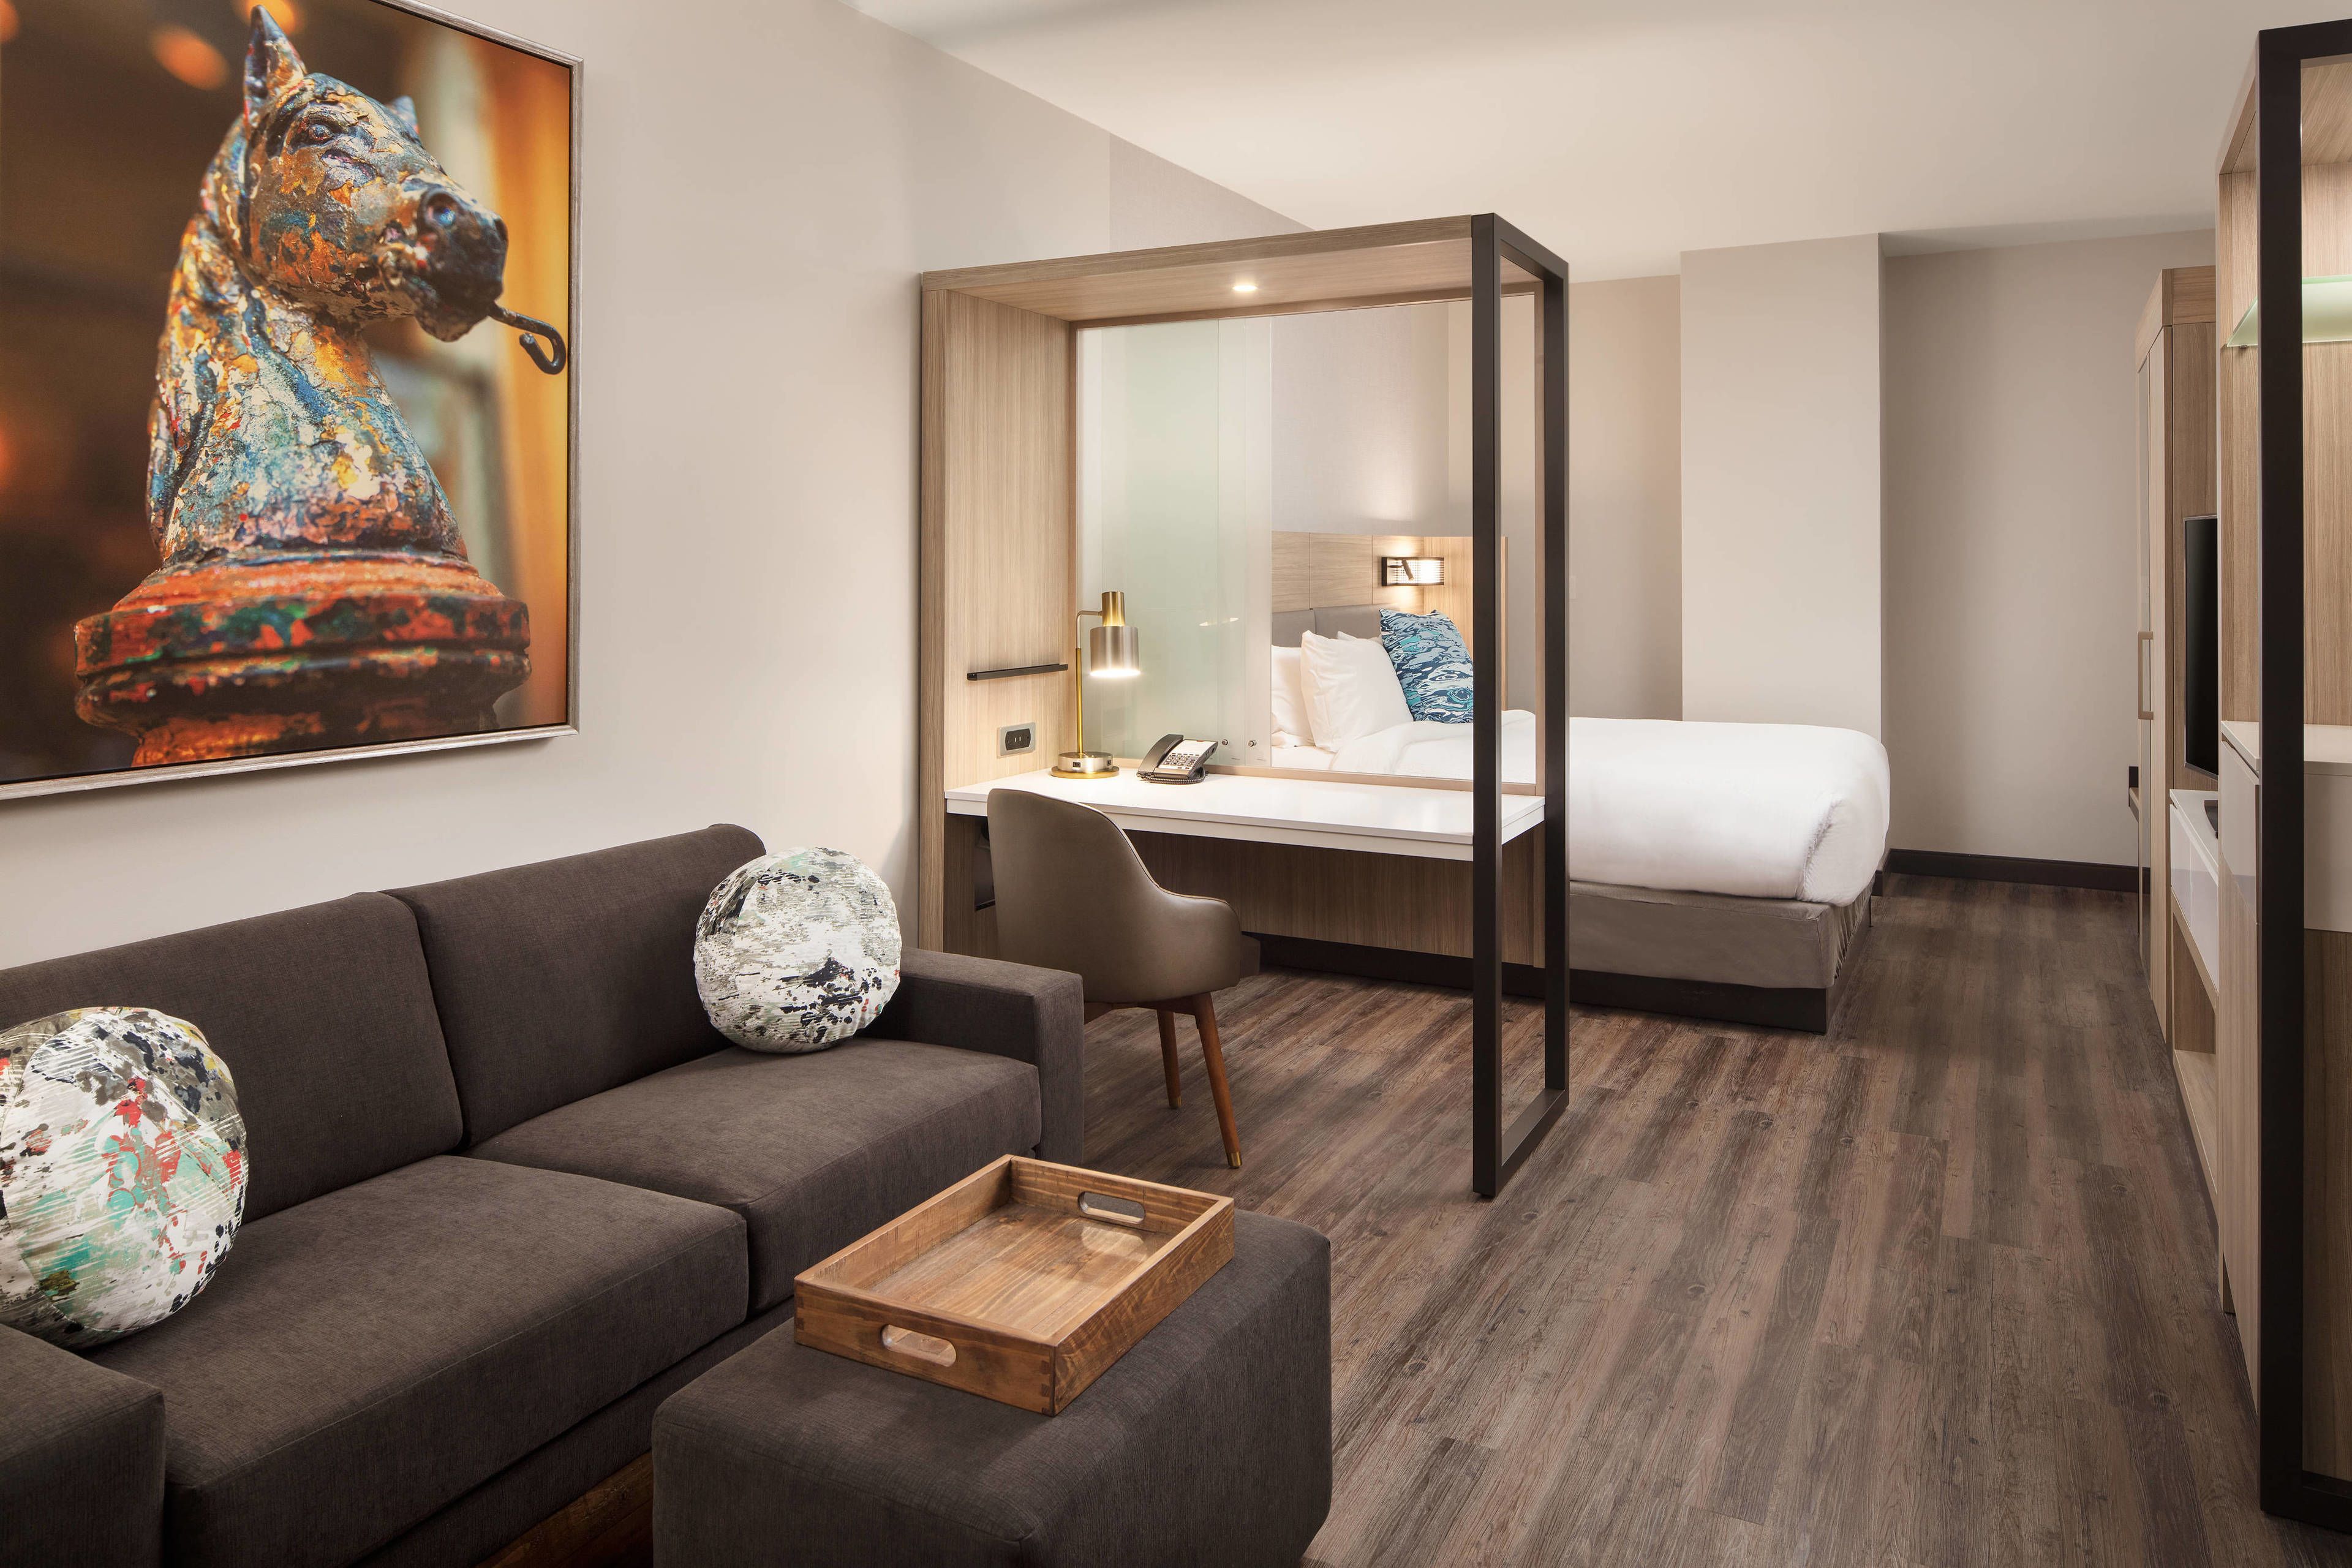 SpringHill Suites New Orleans Downtown/Canal Street